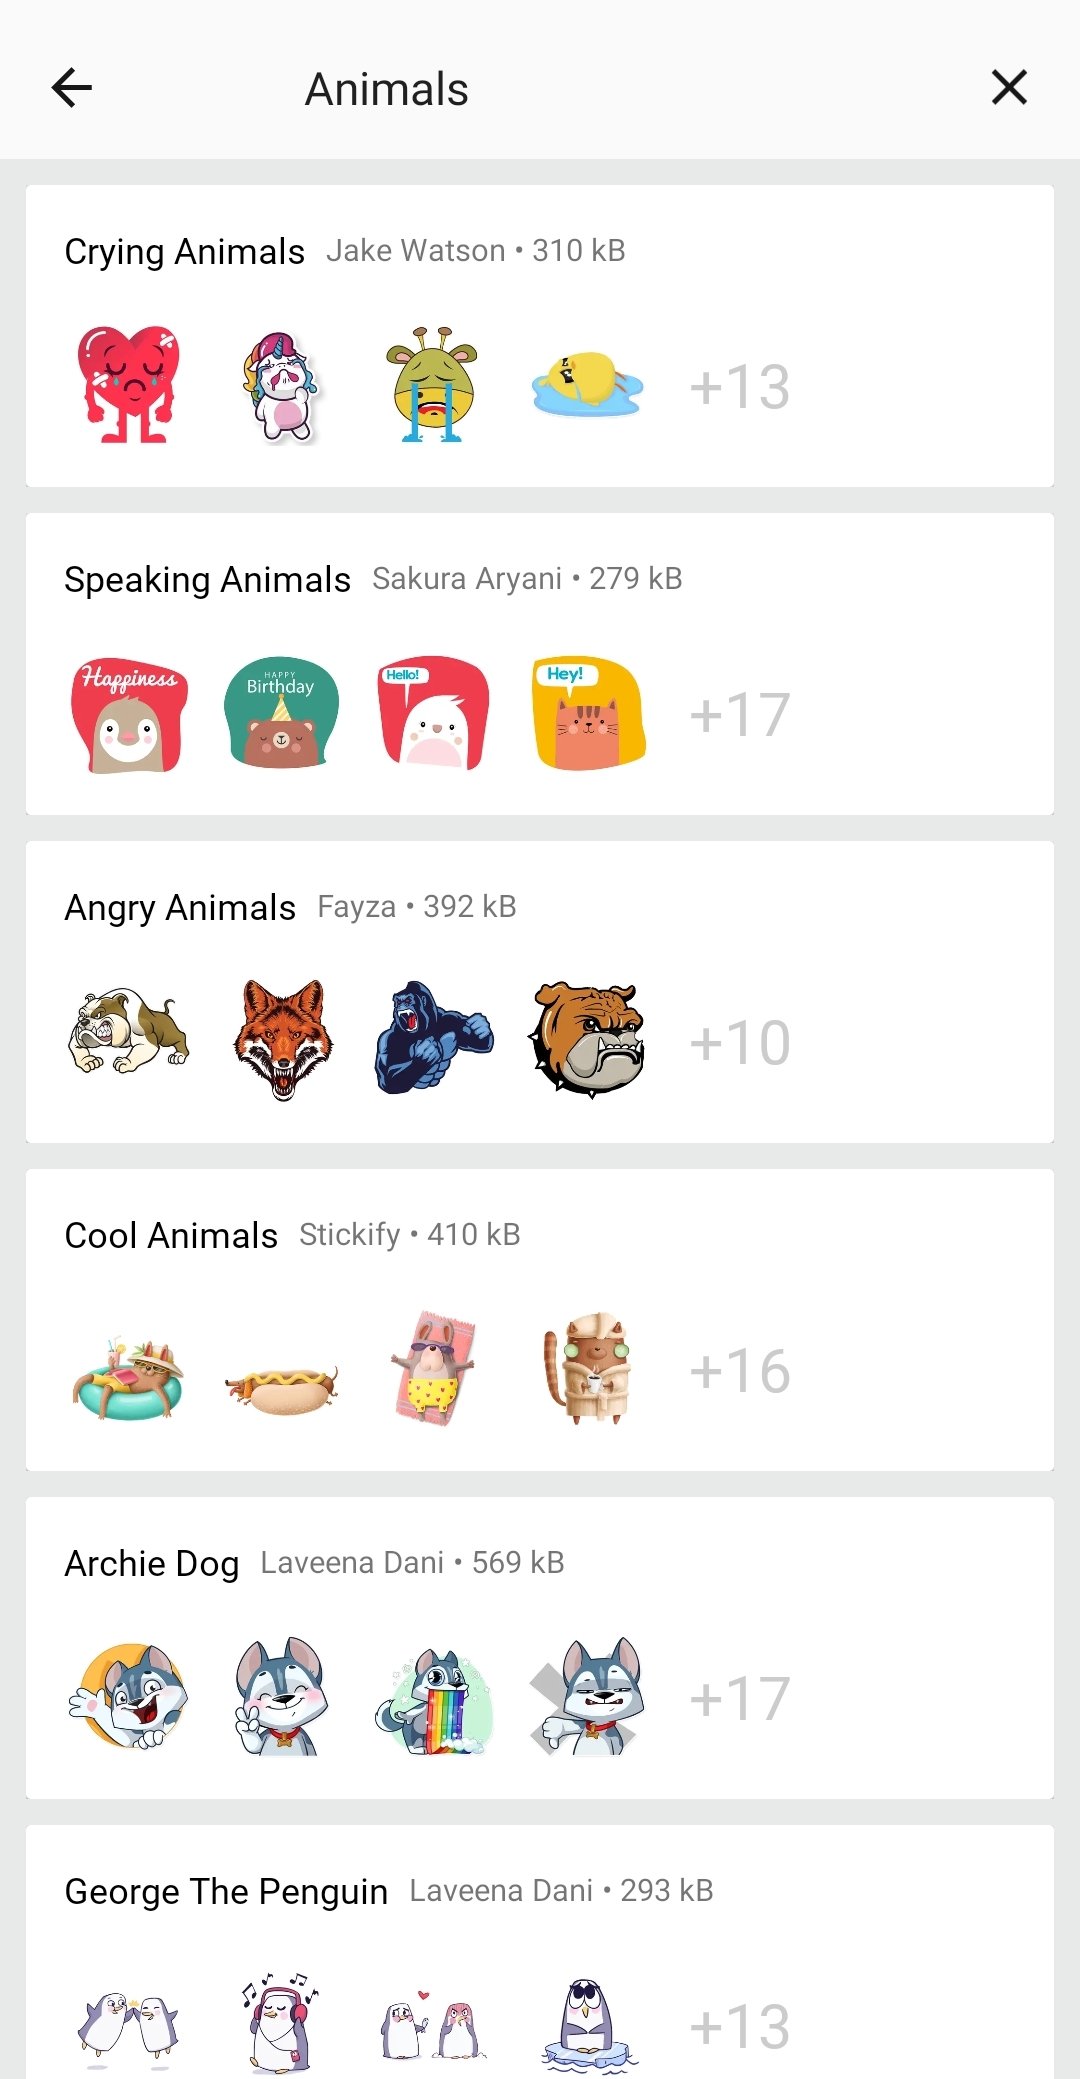 FStik: All Telegram Stickers for Android - Free App Download